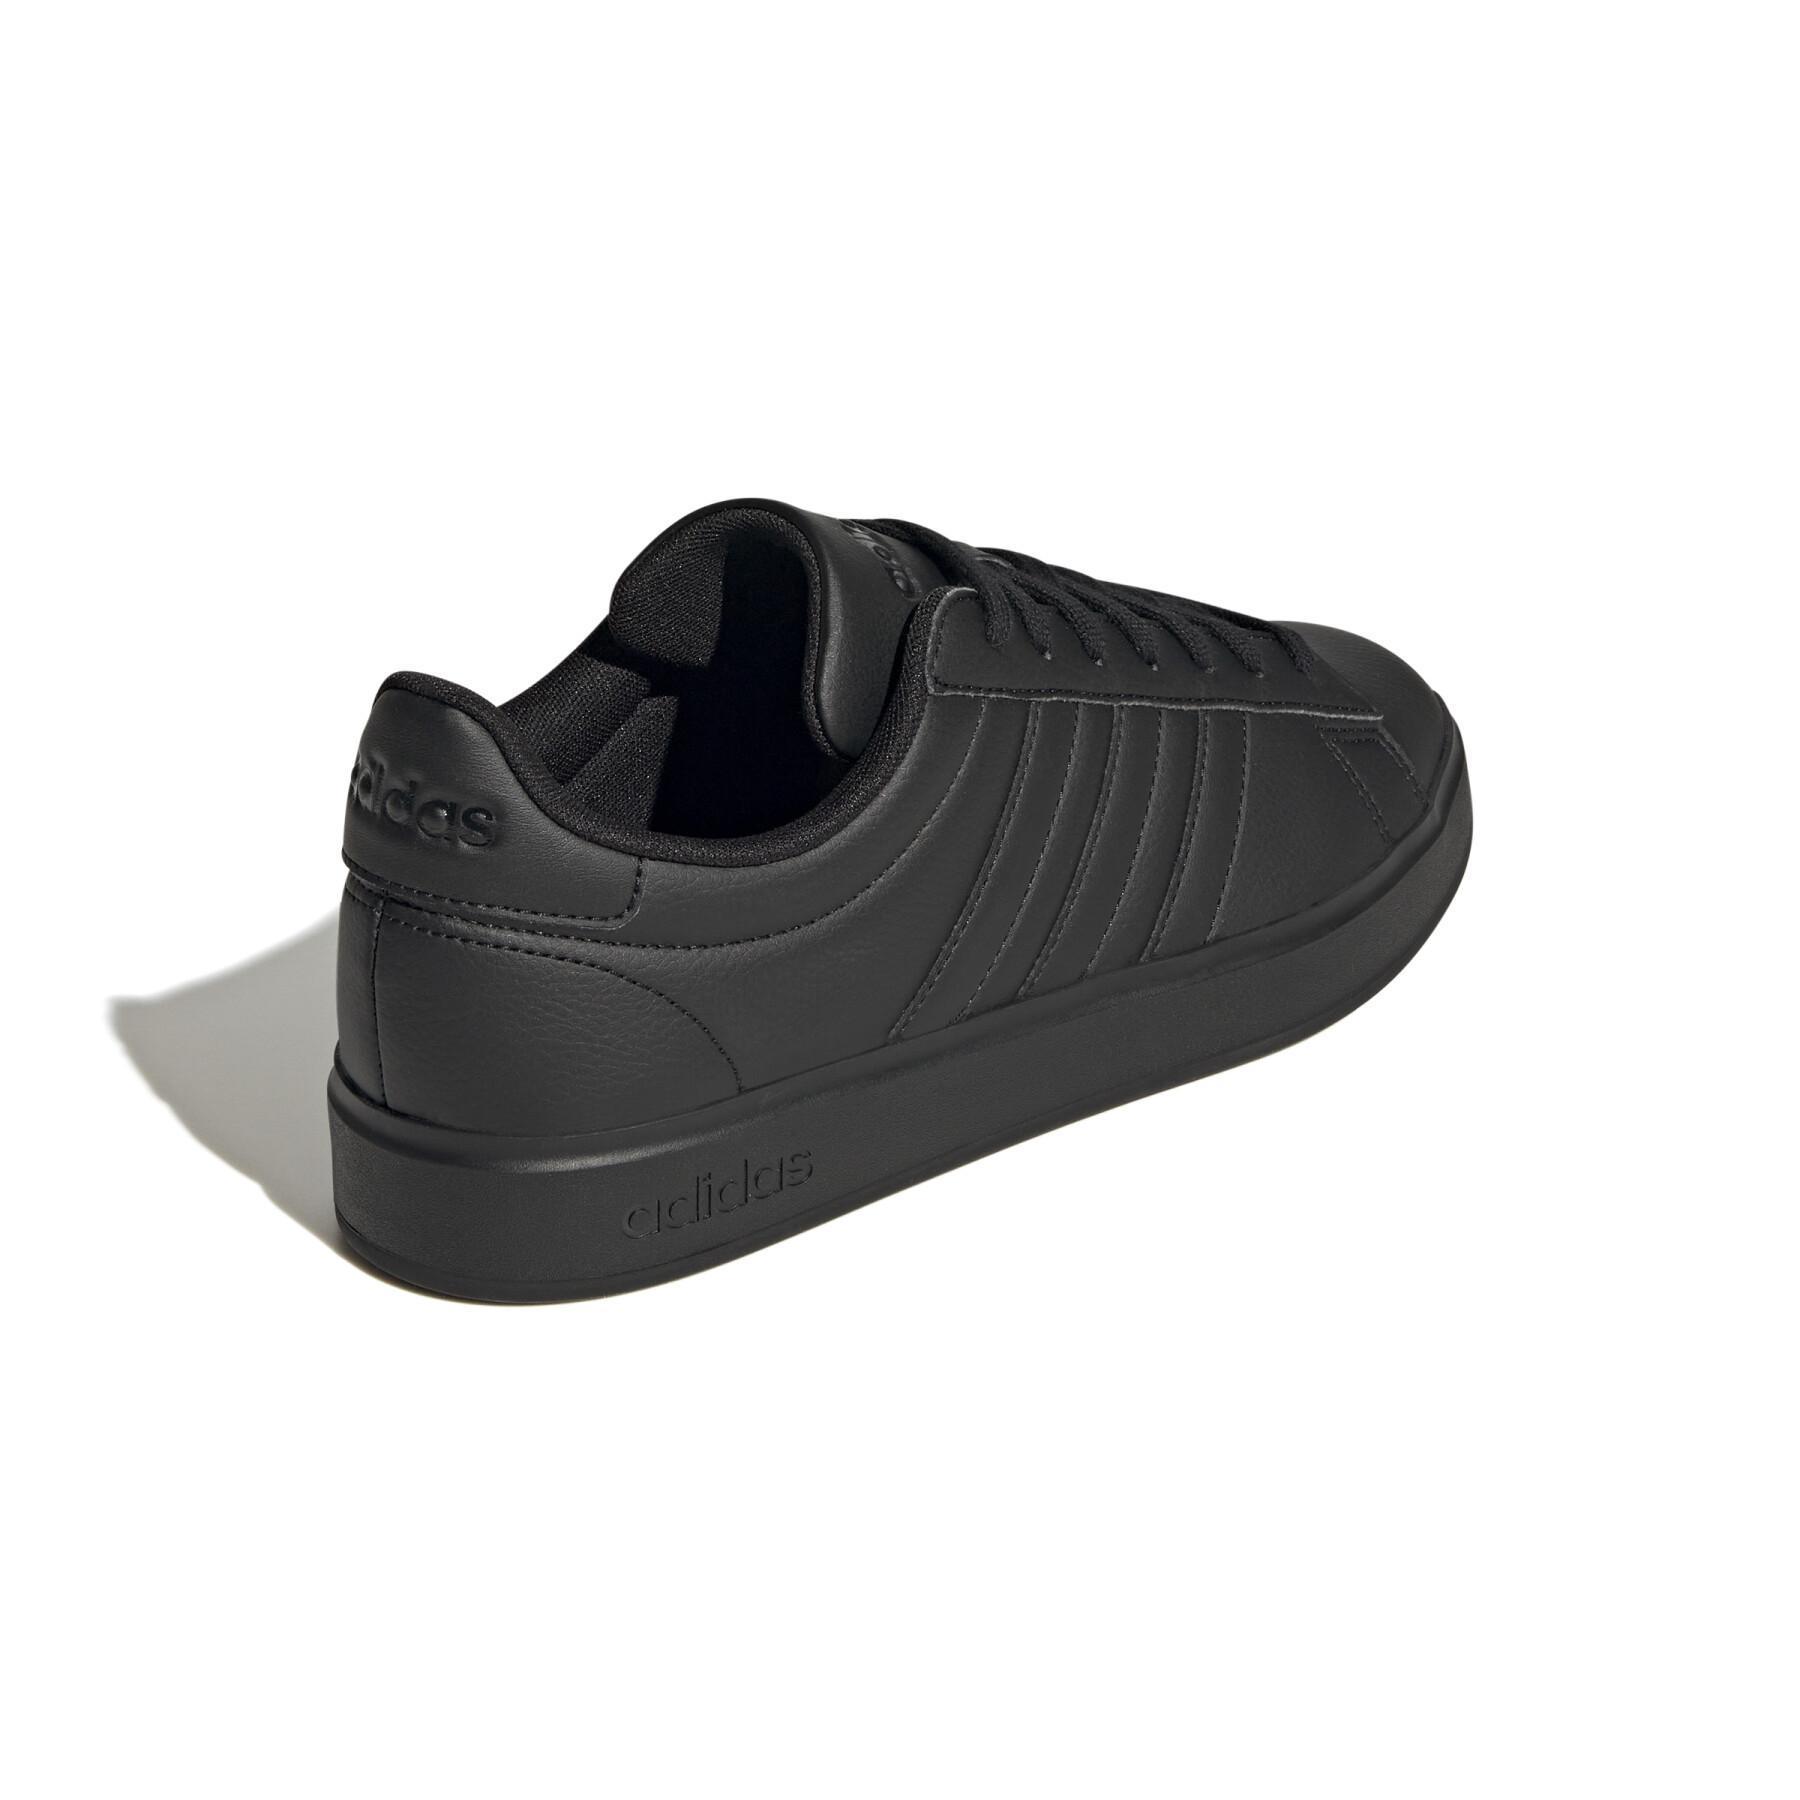 Comfortable large court sneakers adidas Cloudfoam